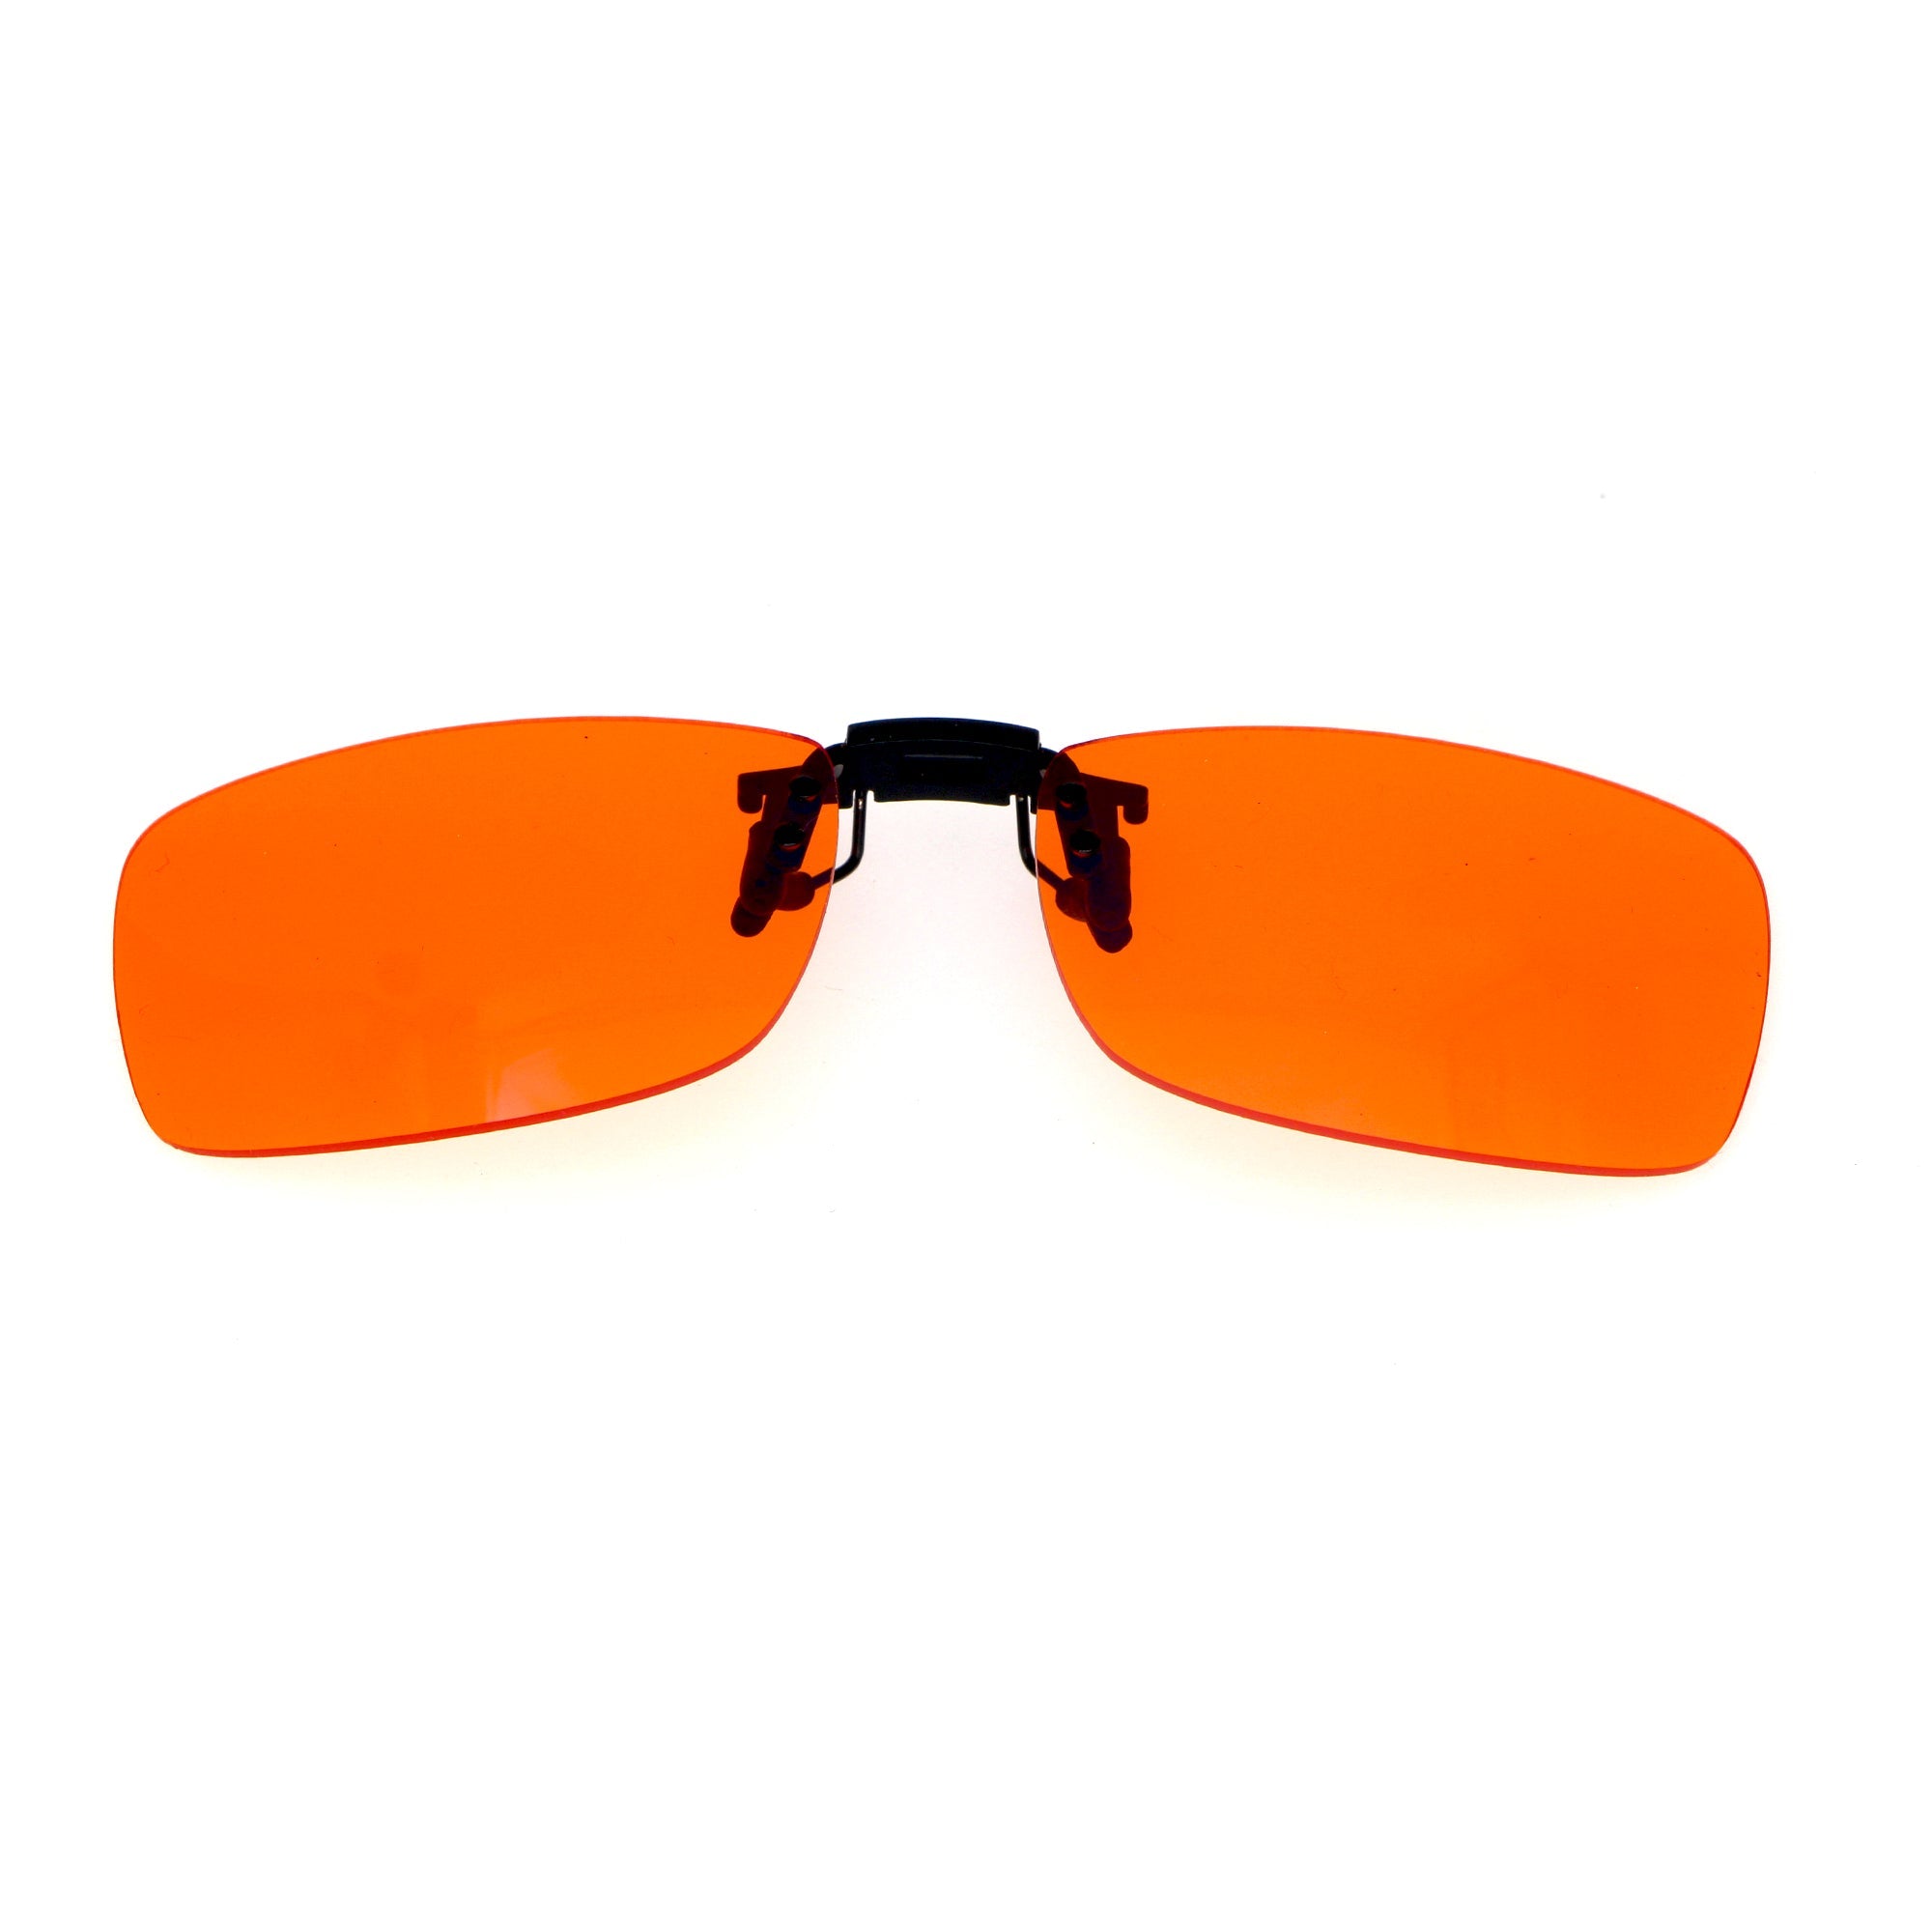 Dilicn FREE GIFT 2 pcs Set Sunglasses Clip ons Anti blue light Clip ons